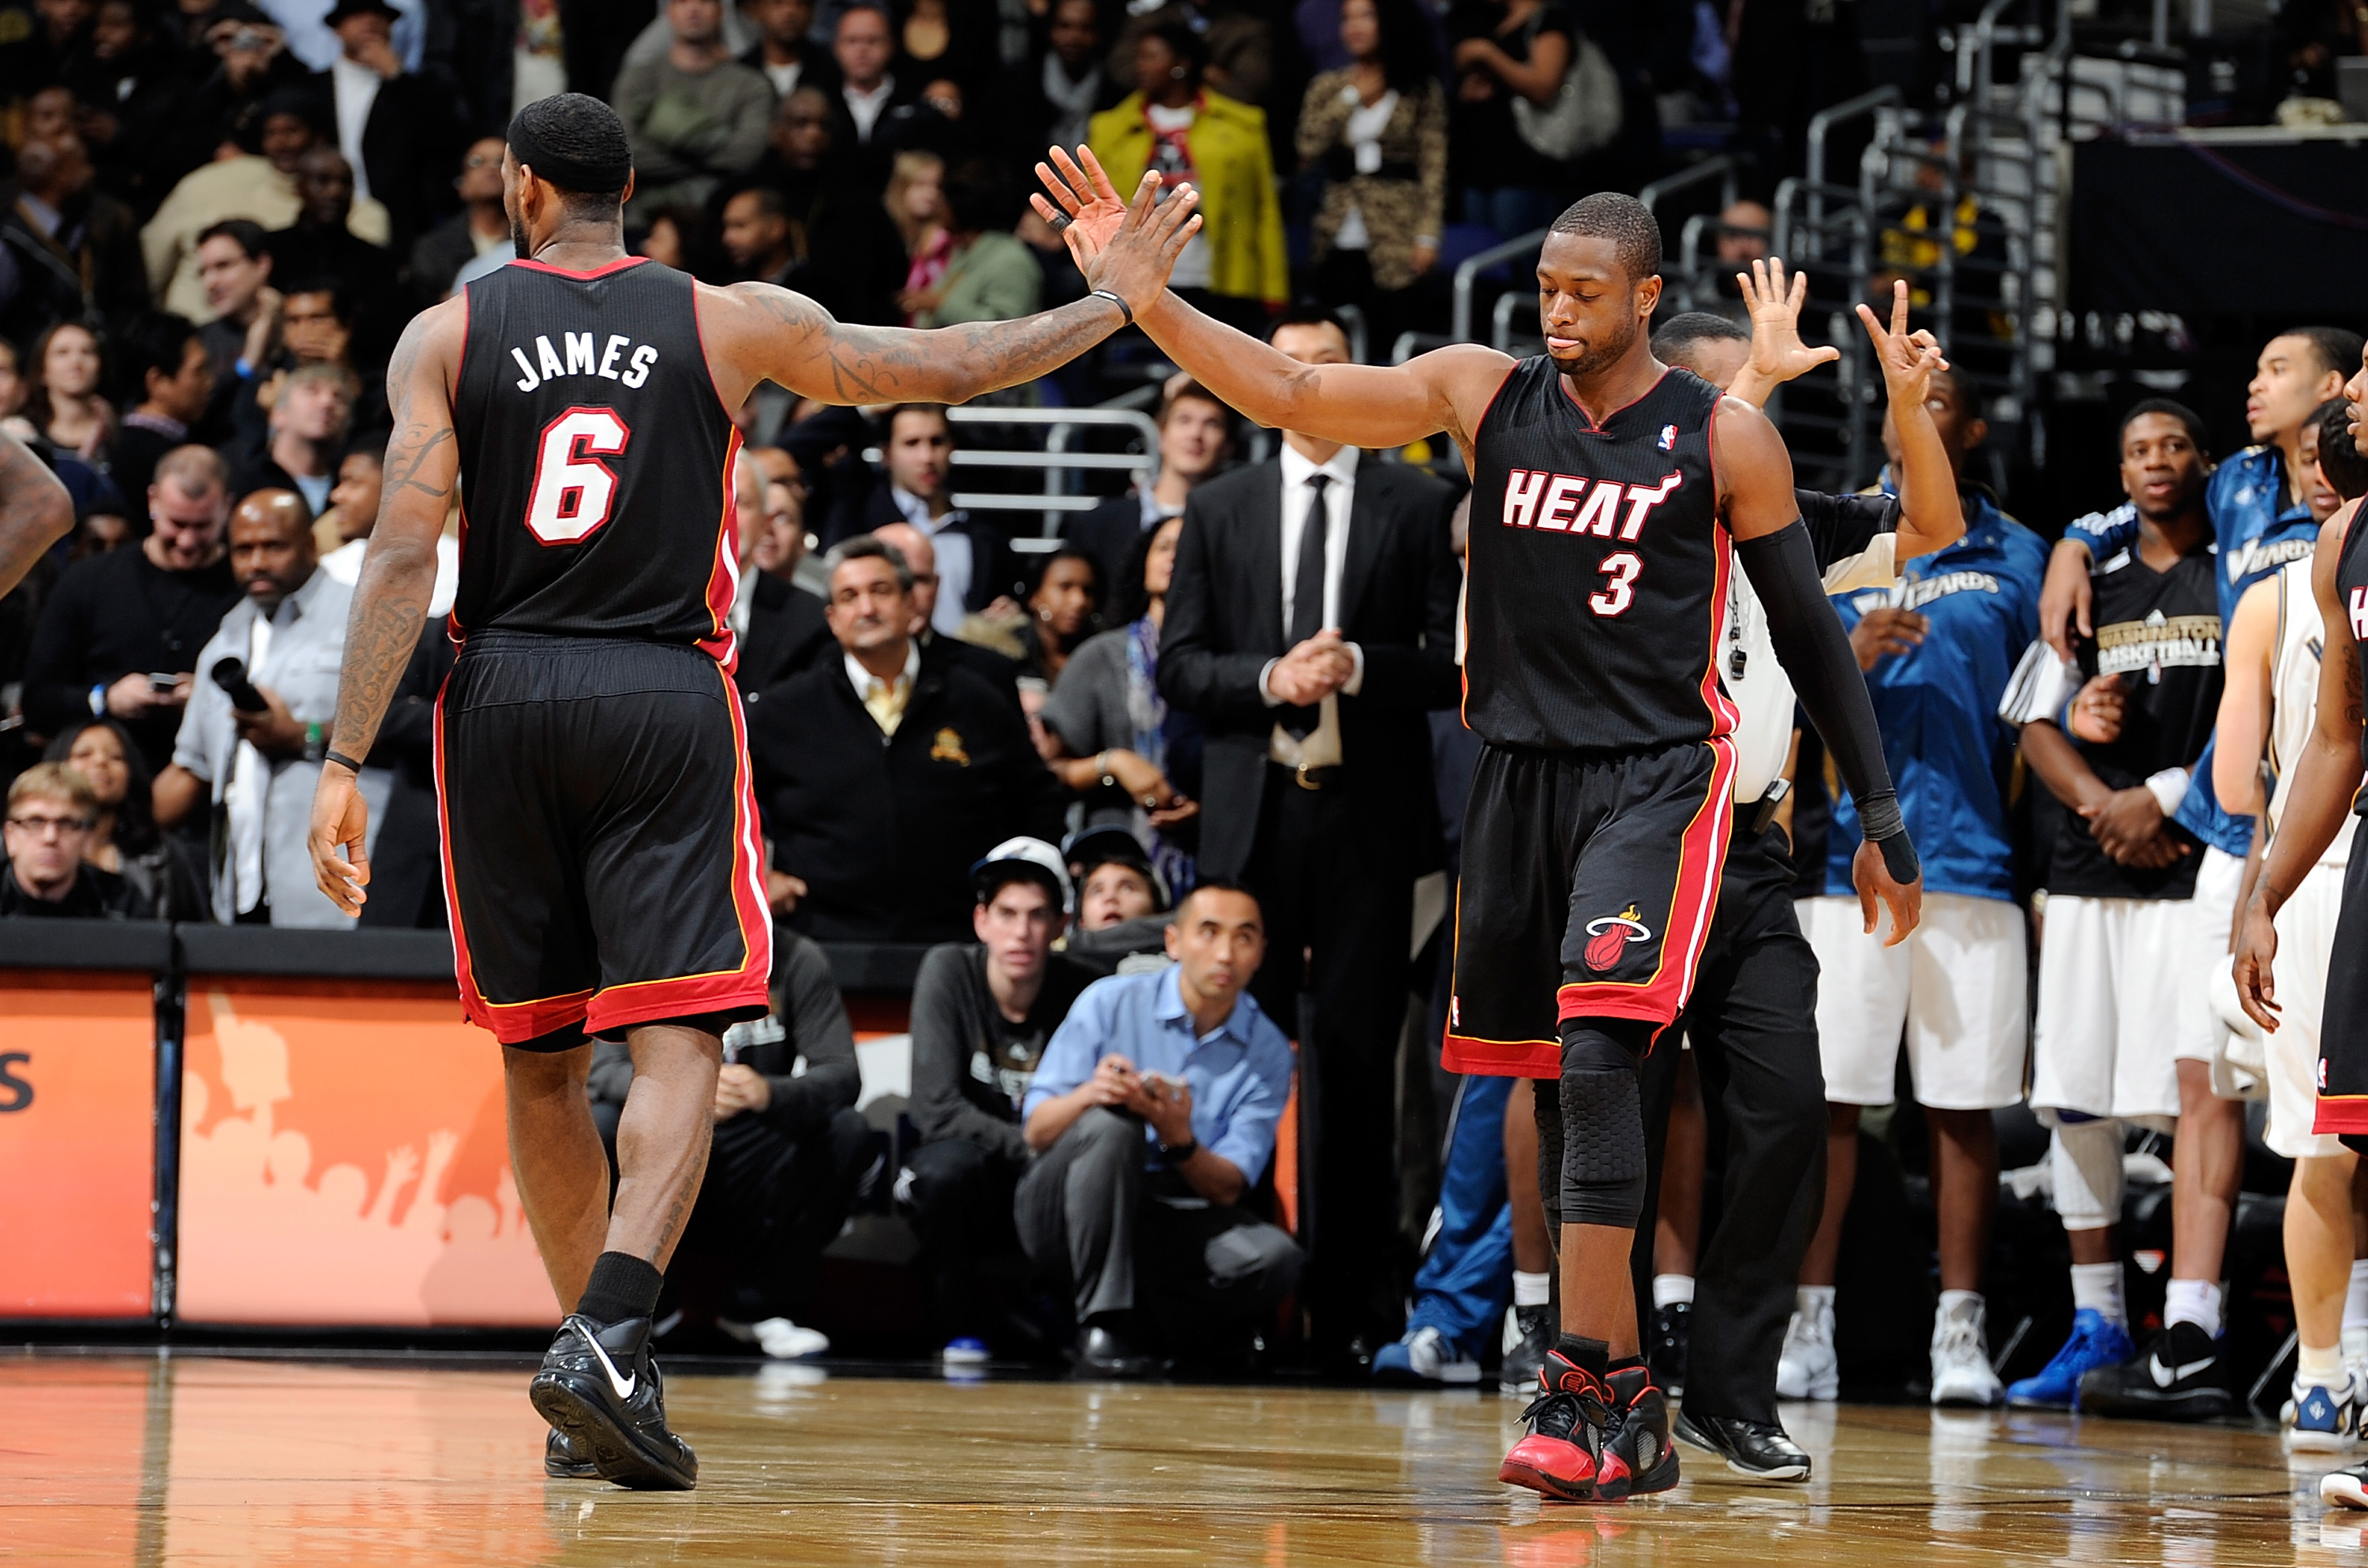 WASHINGTON - DECEMBER 18:  LeBron James #6 congratulates Dwyane Wade #3 after drawing a foul in the fourth quarter against the Washington Wizards at the Verizon Center on December 18, 2010 in Washington, DC. NOTE TO USER: User expressly acknowledges and a